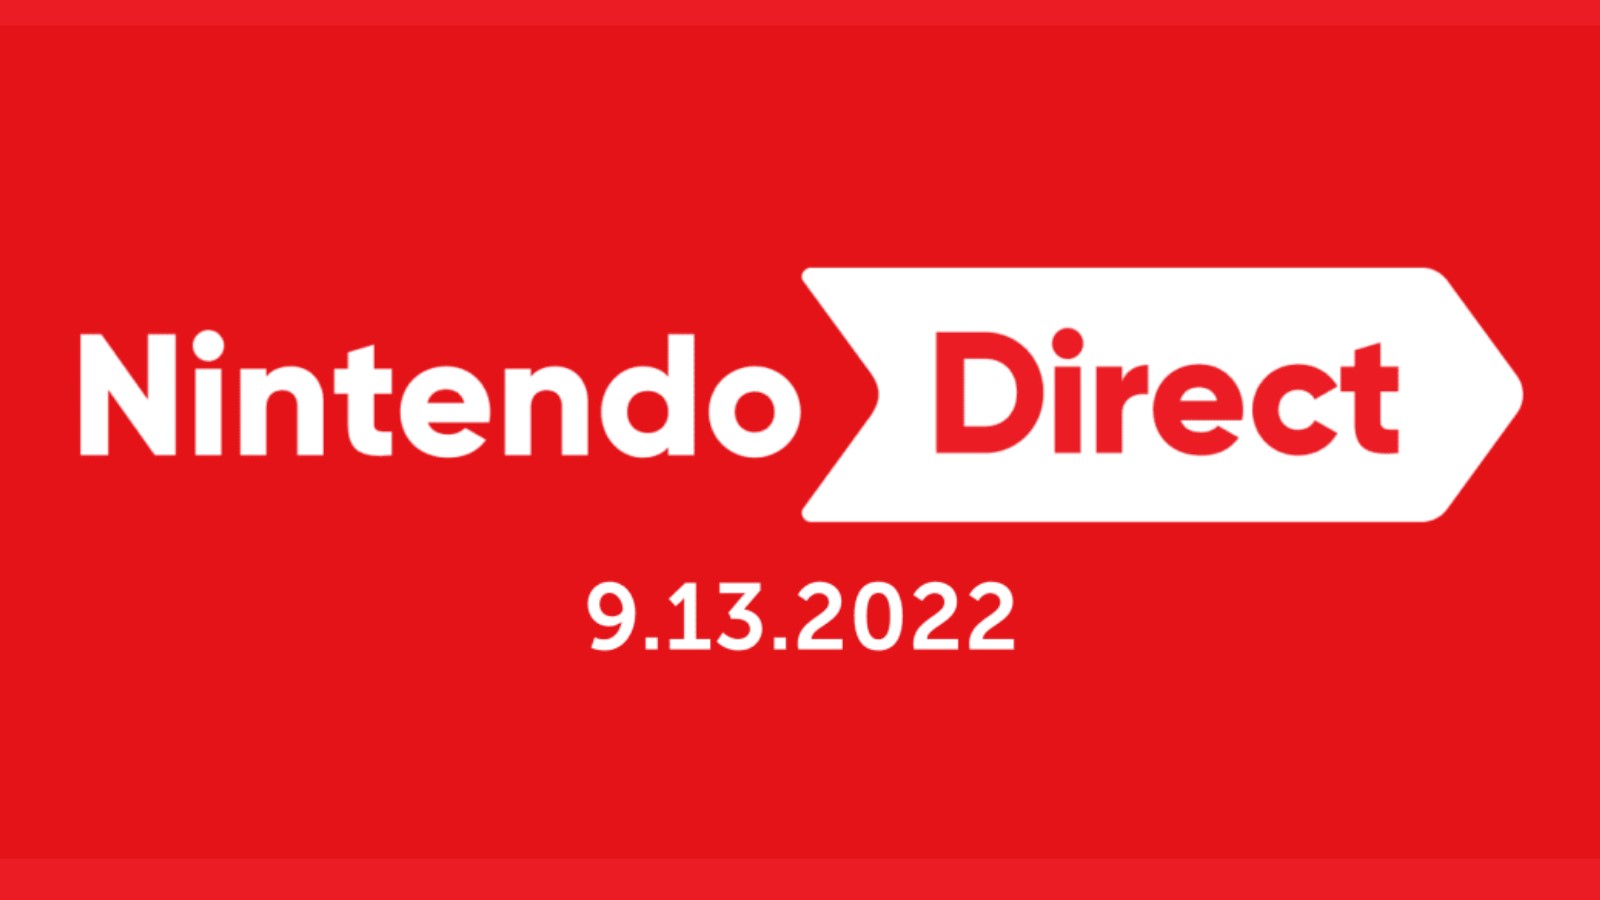 Nintendo Direct online event reveals new games, trailers for